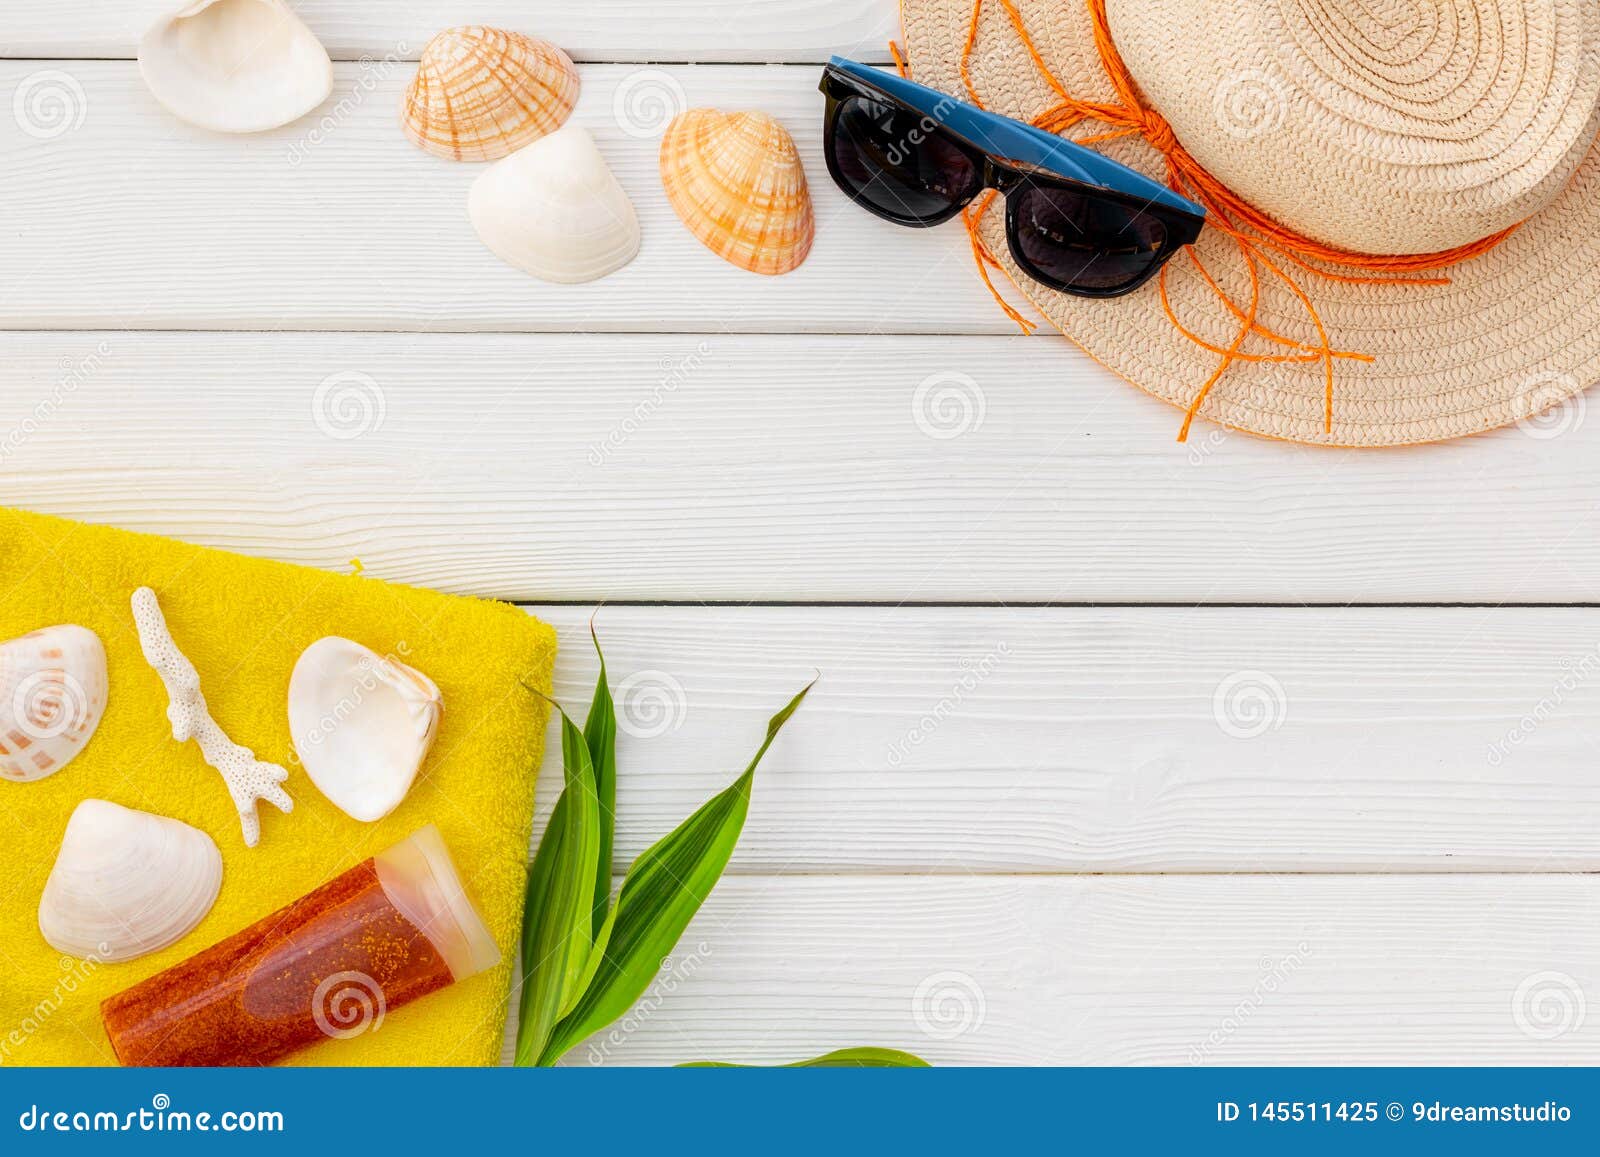 Summer Travaling To the Sea with Straw Hat, Sun Glasses, Sunblock ...